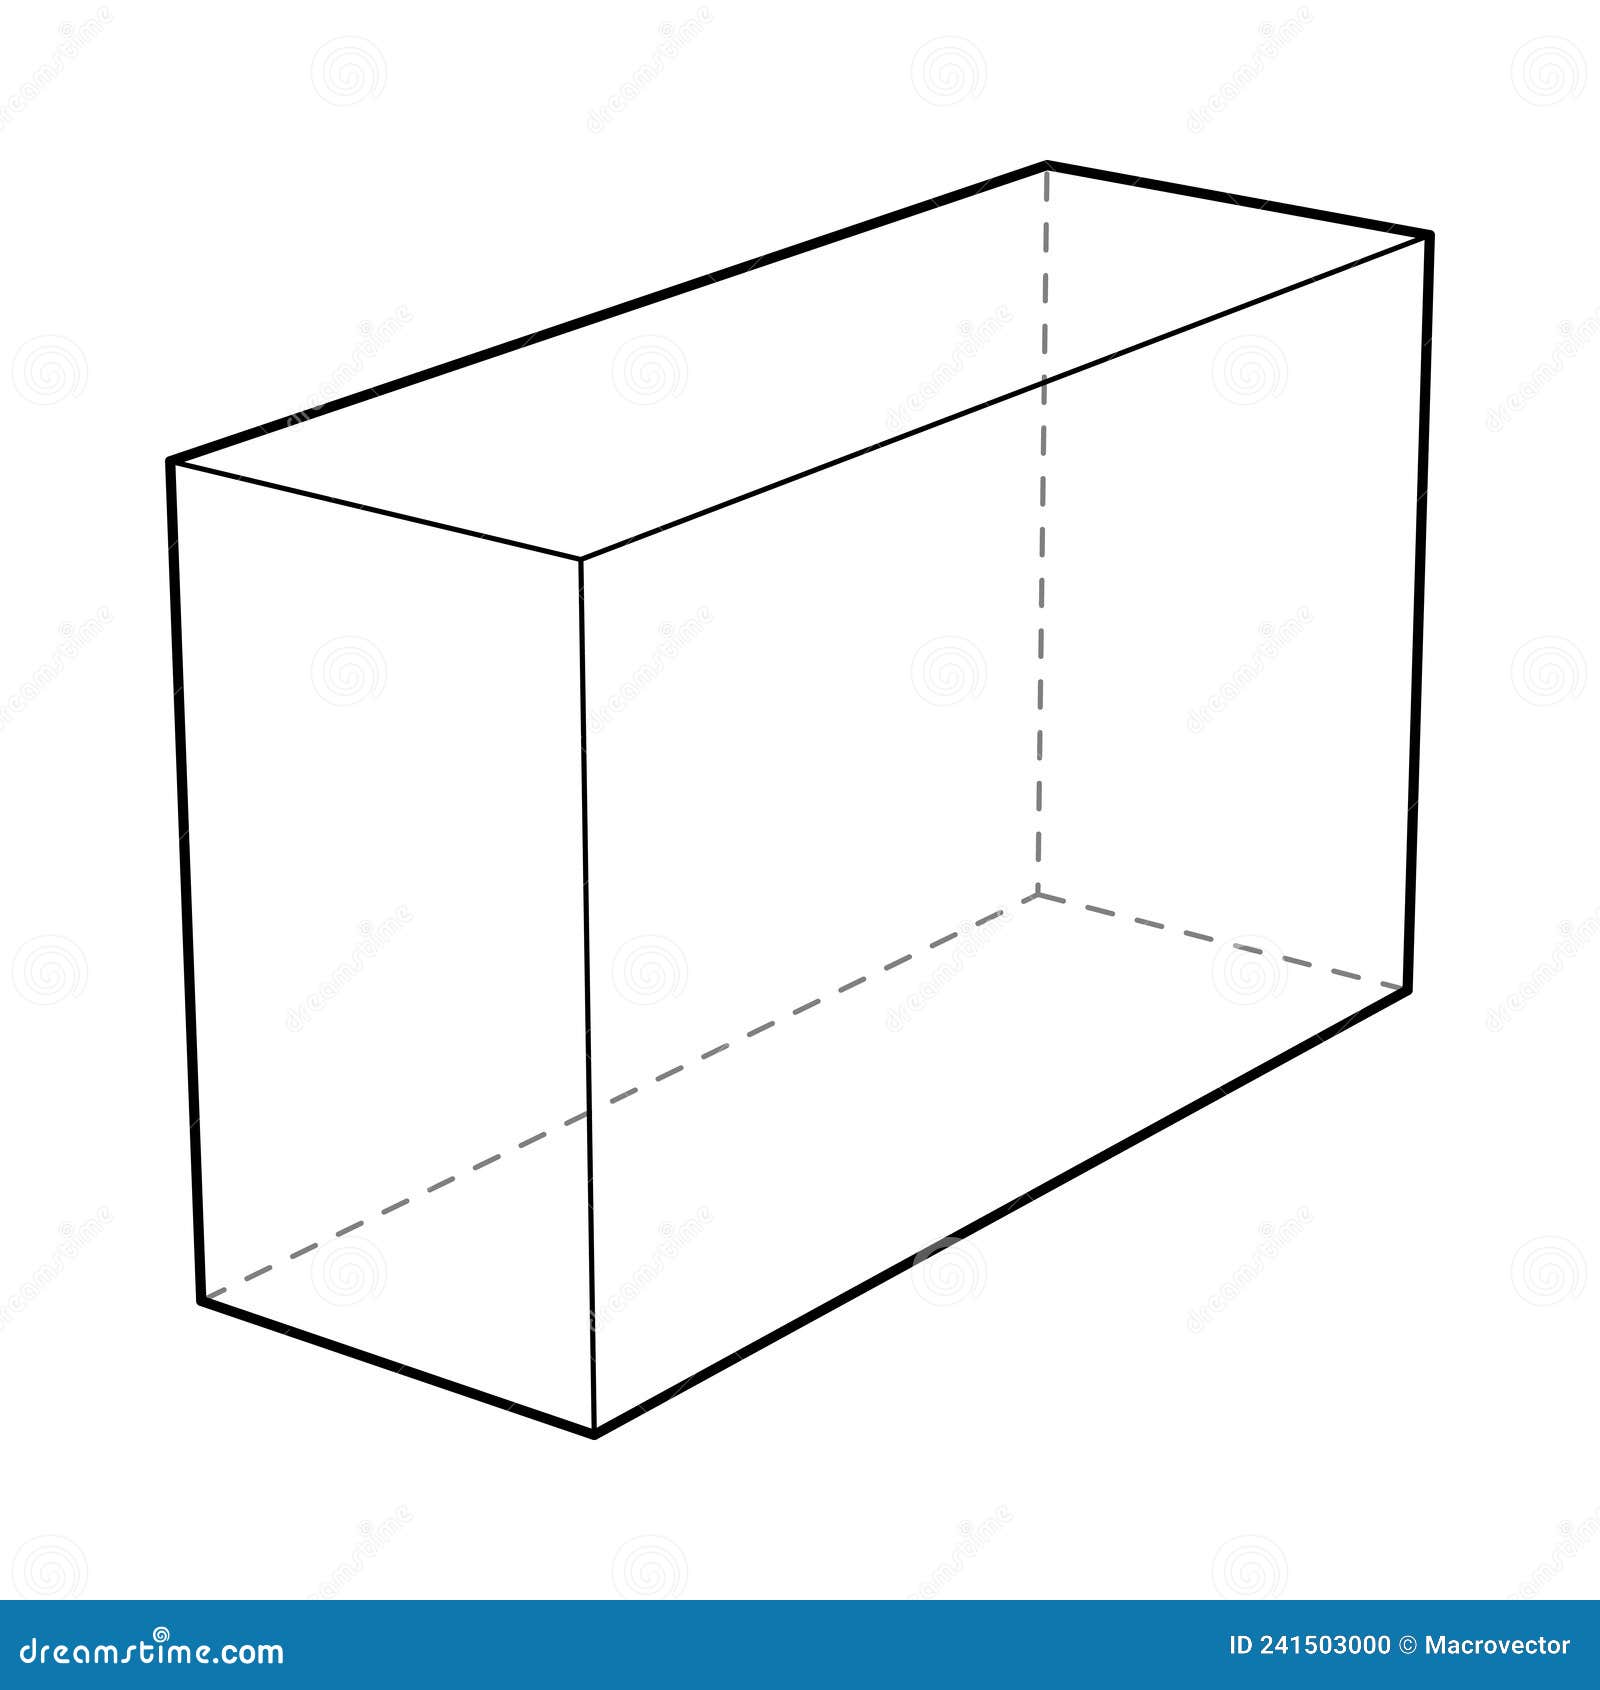 Draw an isometric sketch for a cuboid of dimensions 6 x 3 x 4 - Brainly.in